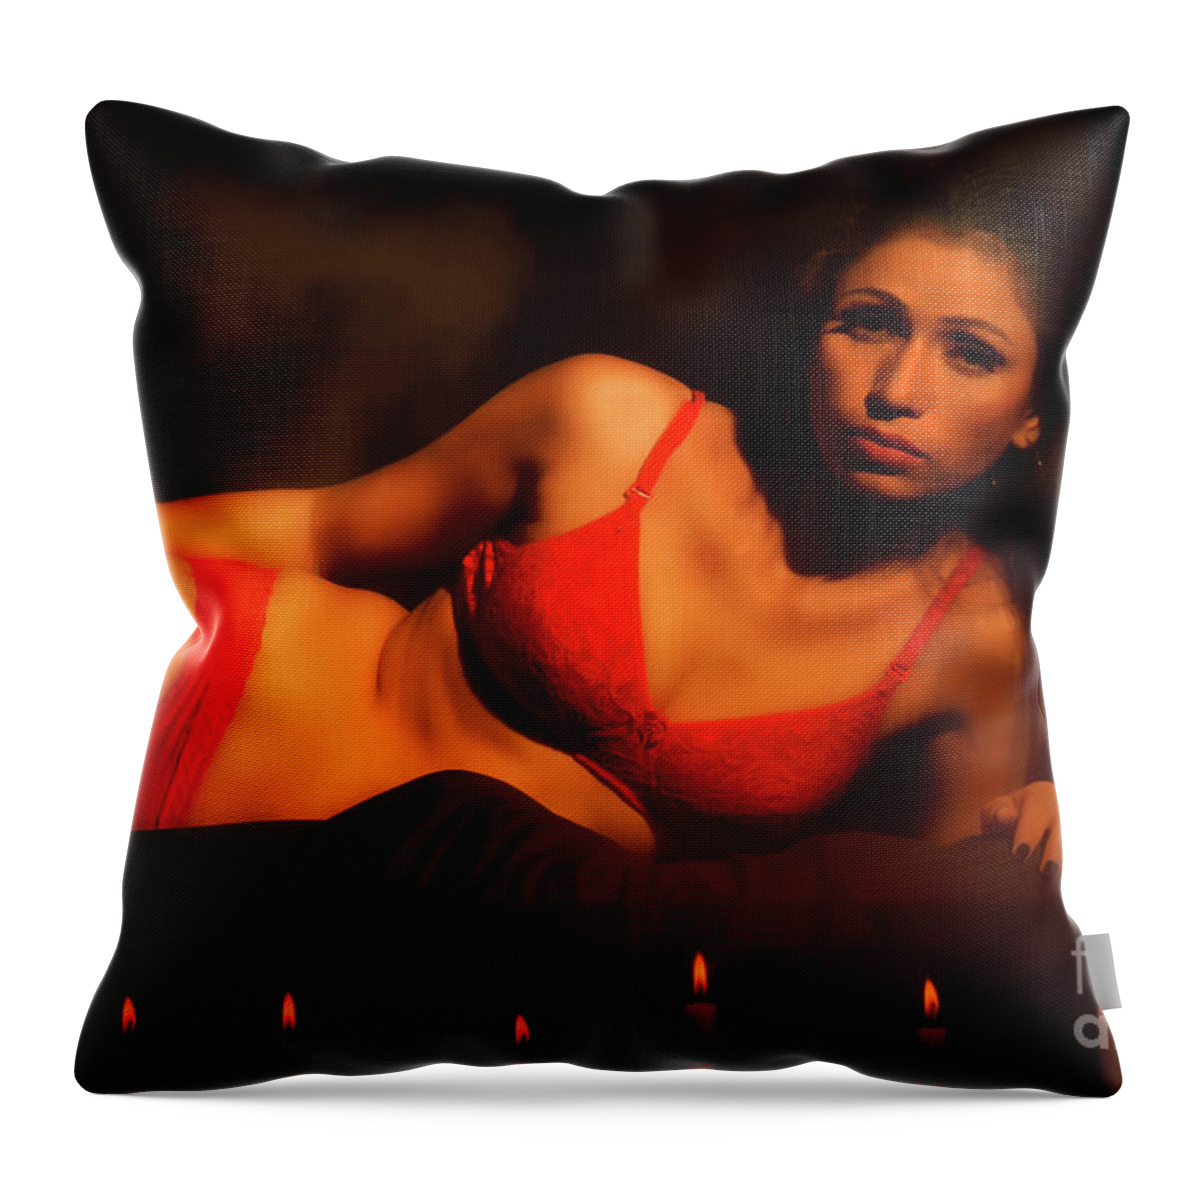 Seductive Throw Pillow featuring the photograph Red Lingerie by Kiran Joshi